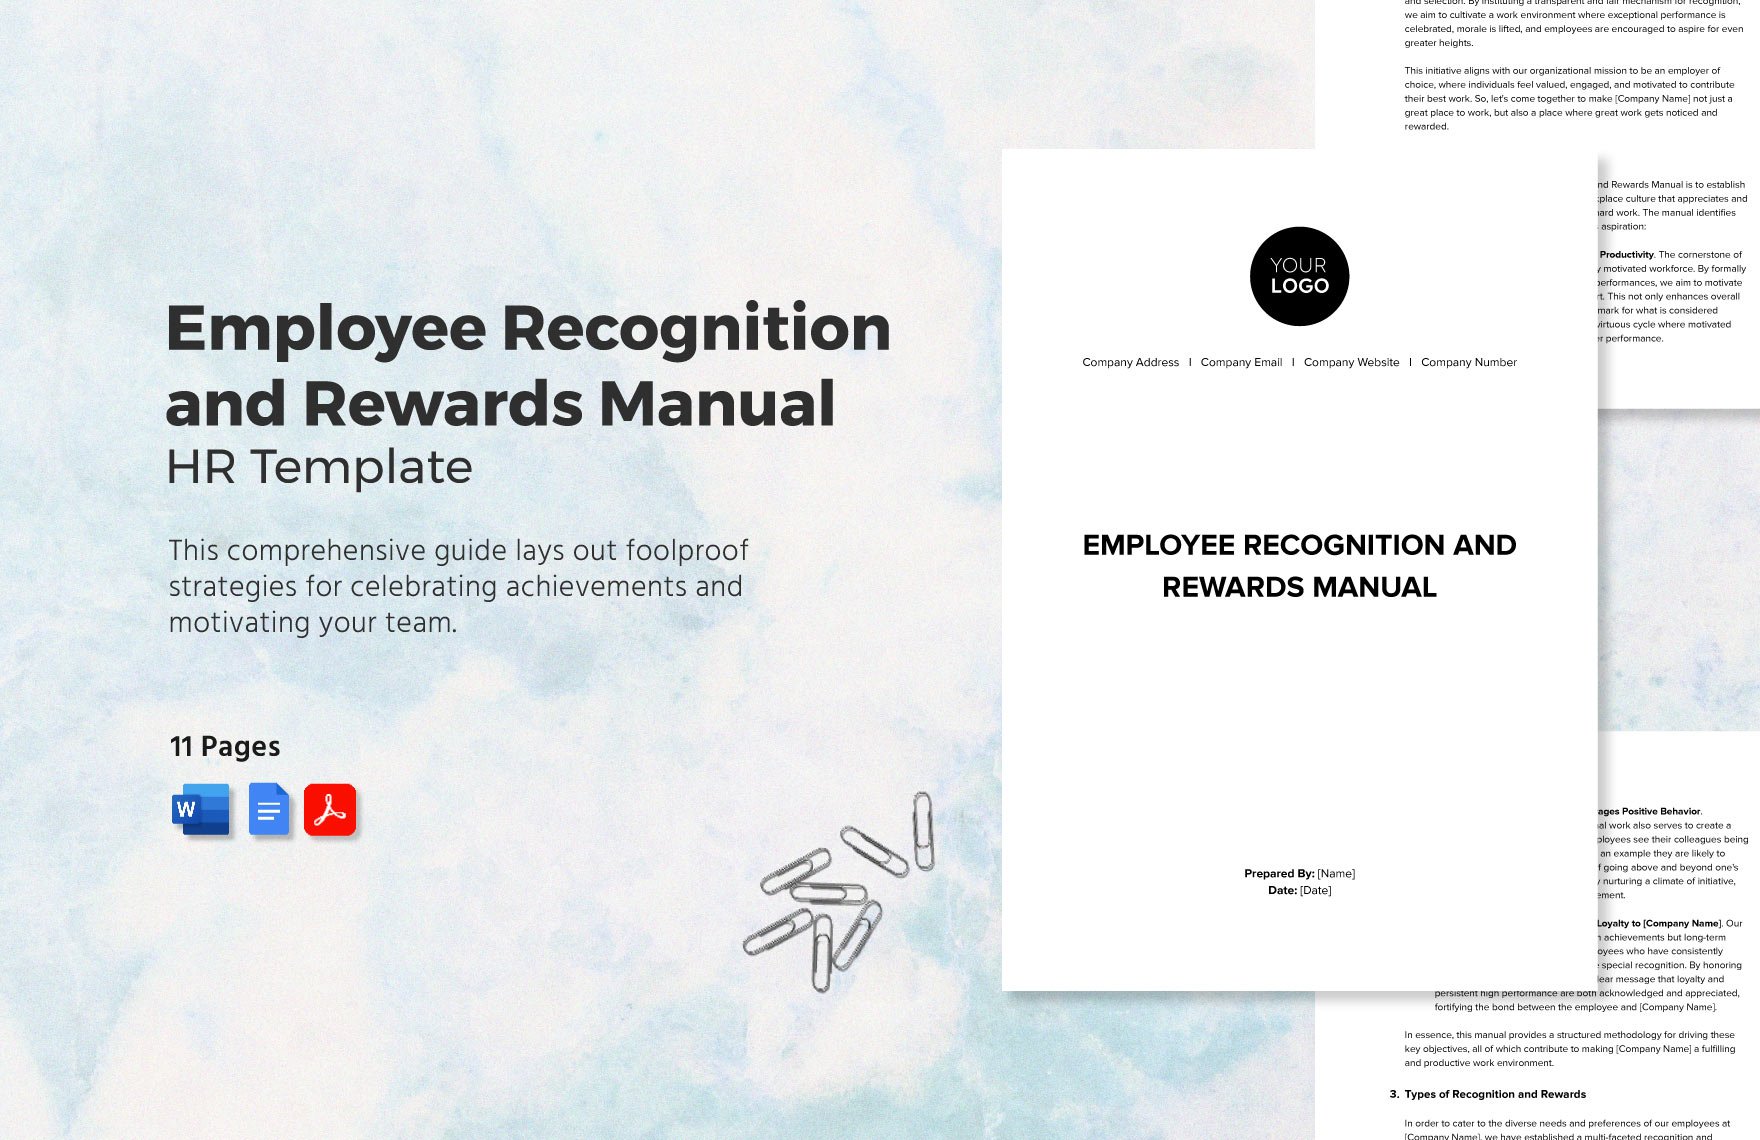 Employee Recognition and Rewards Manual HR Template in Word, Google Docs, PDF